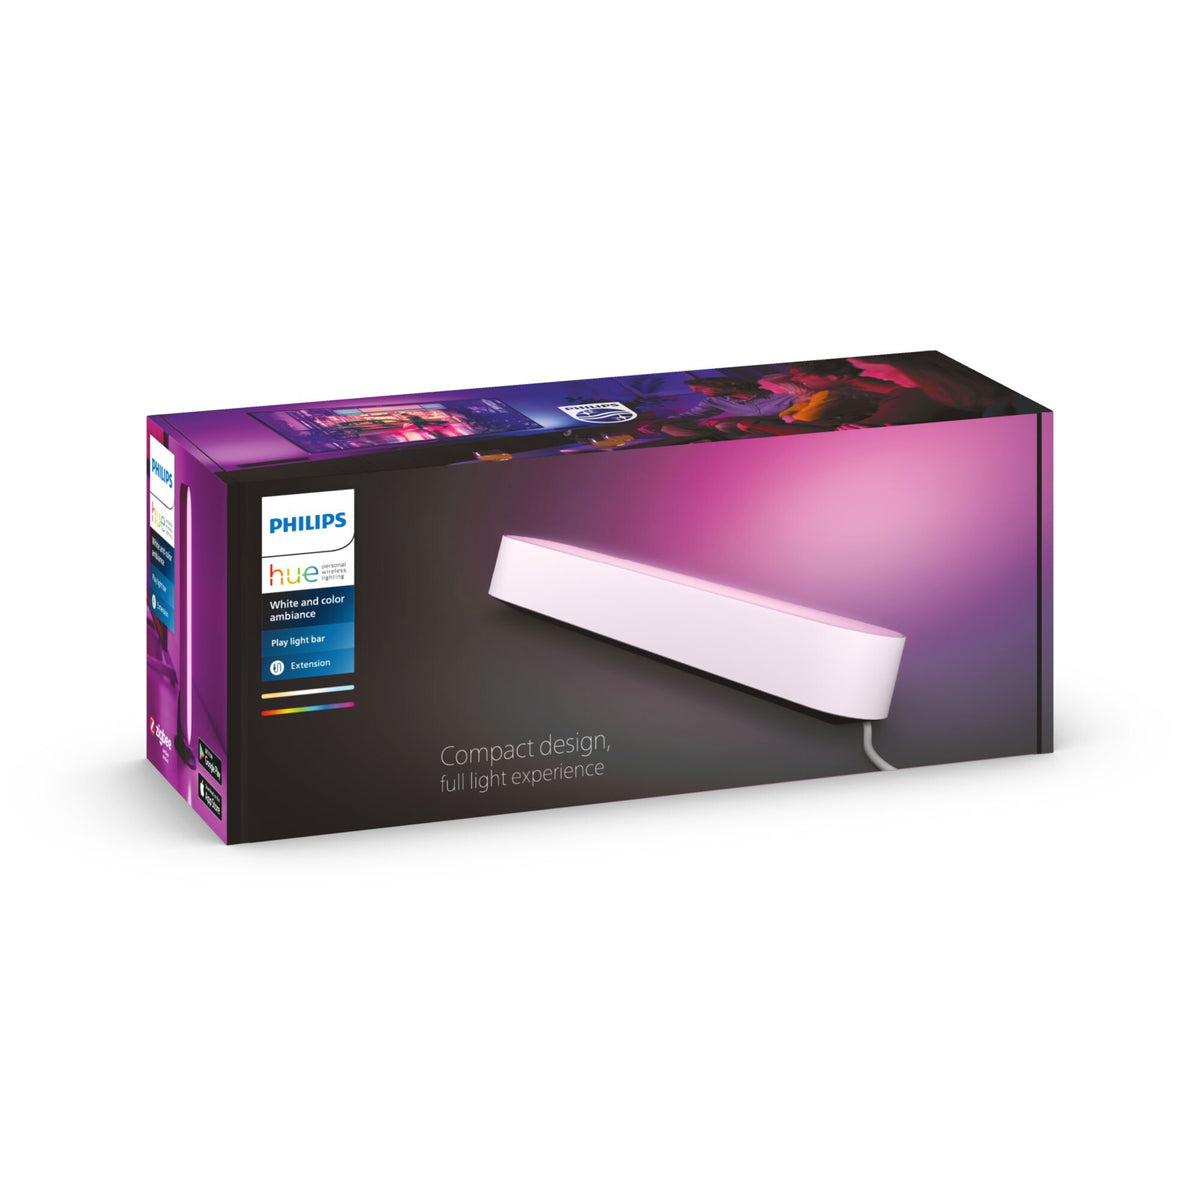 Philips Hue Play light bar Extension Pack in White - White and colour ambience (Pack of 1)